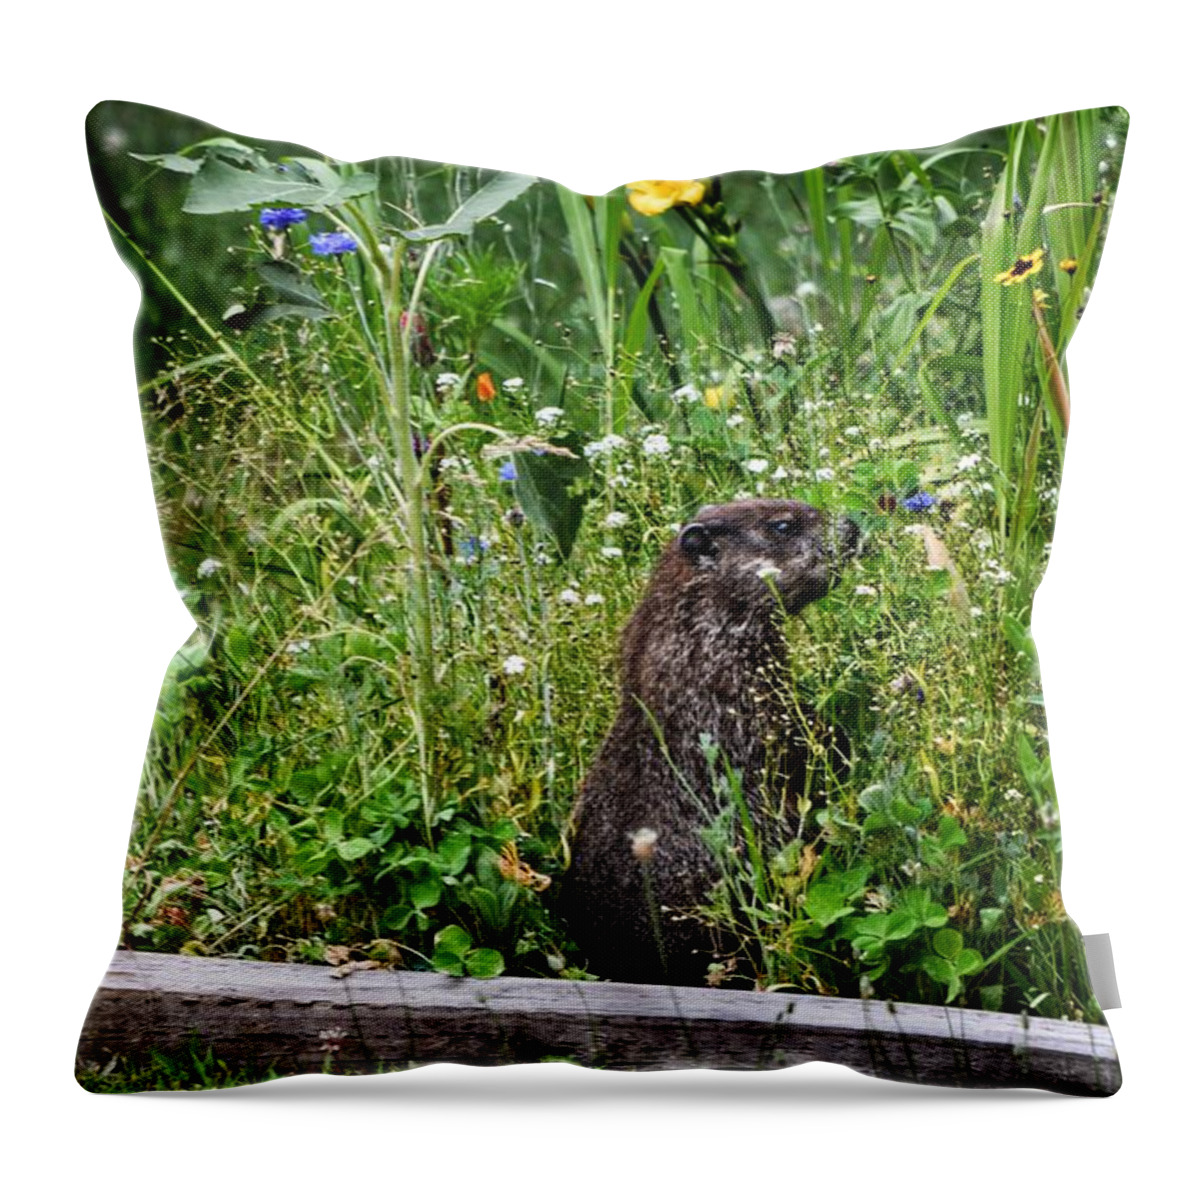 This Photograph Was Taken In Connecticut. Throw Pillow featuring the photograph Caddyshack by Joseph Caban